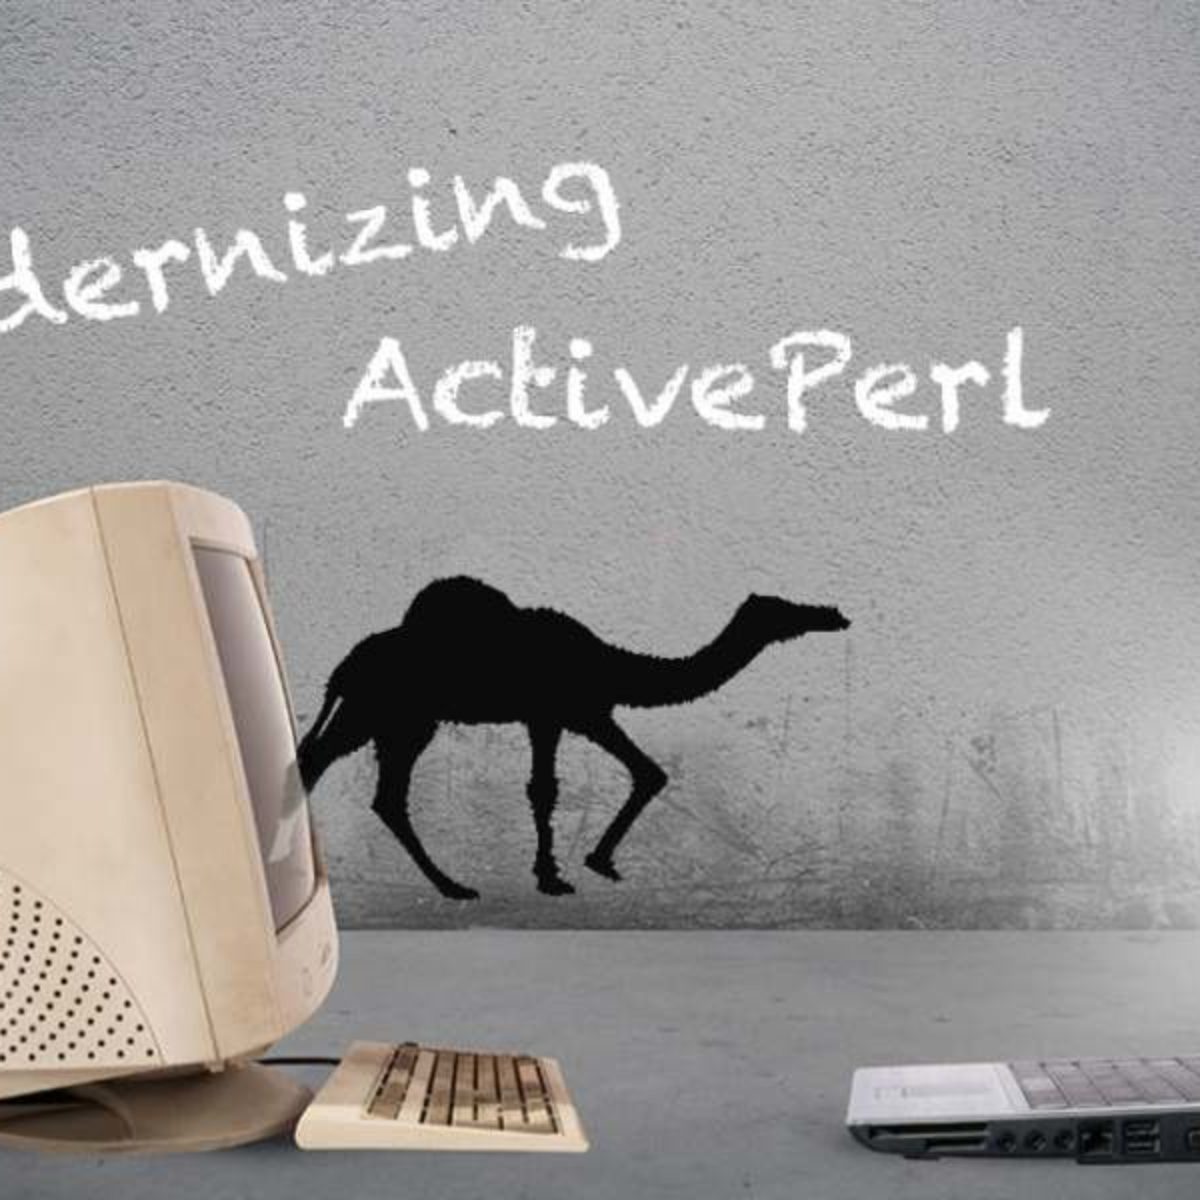 activestate perl